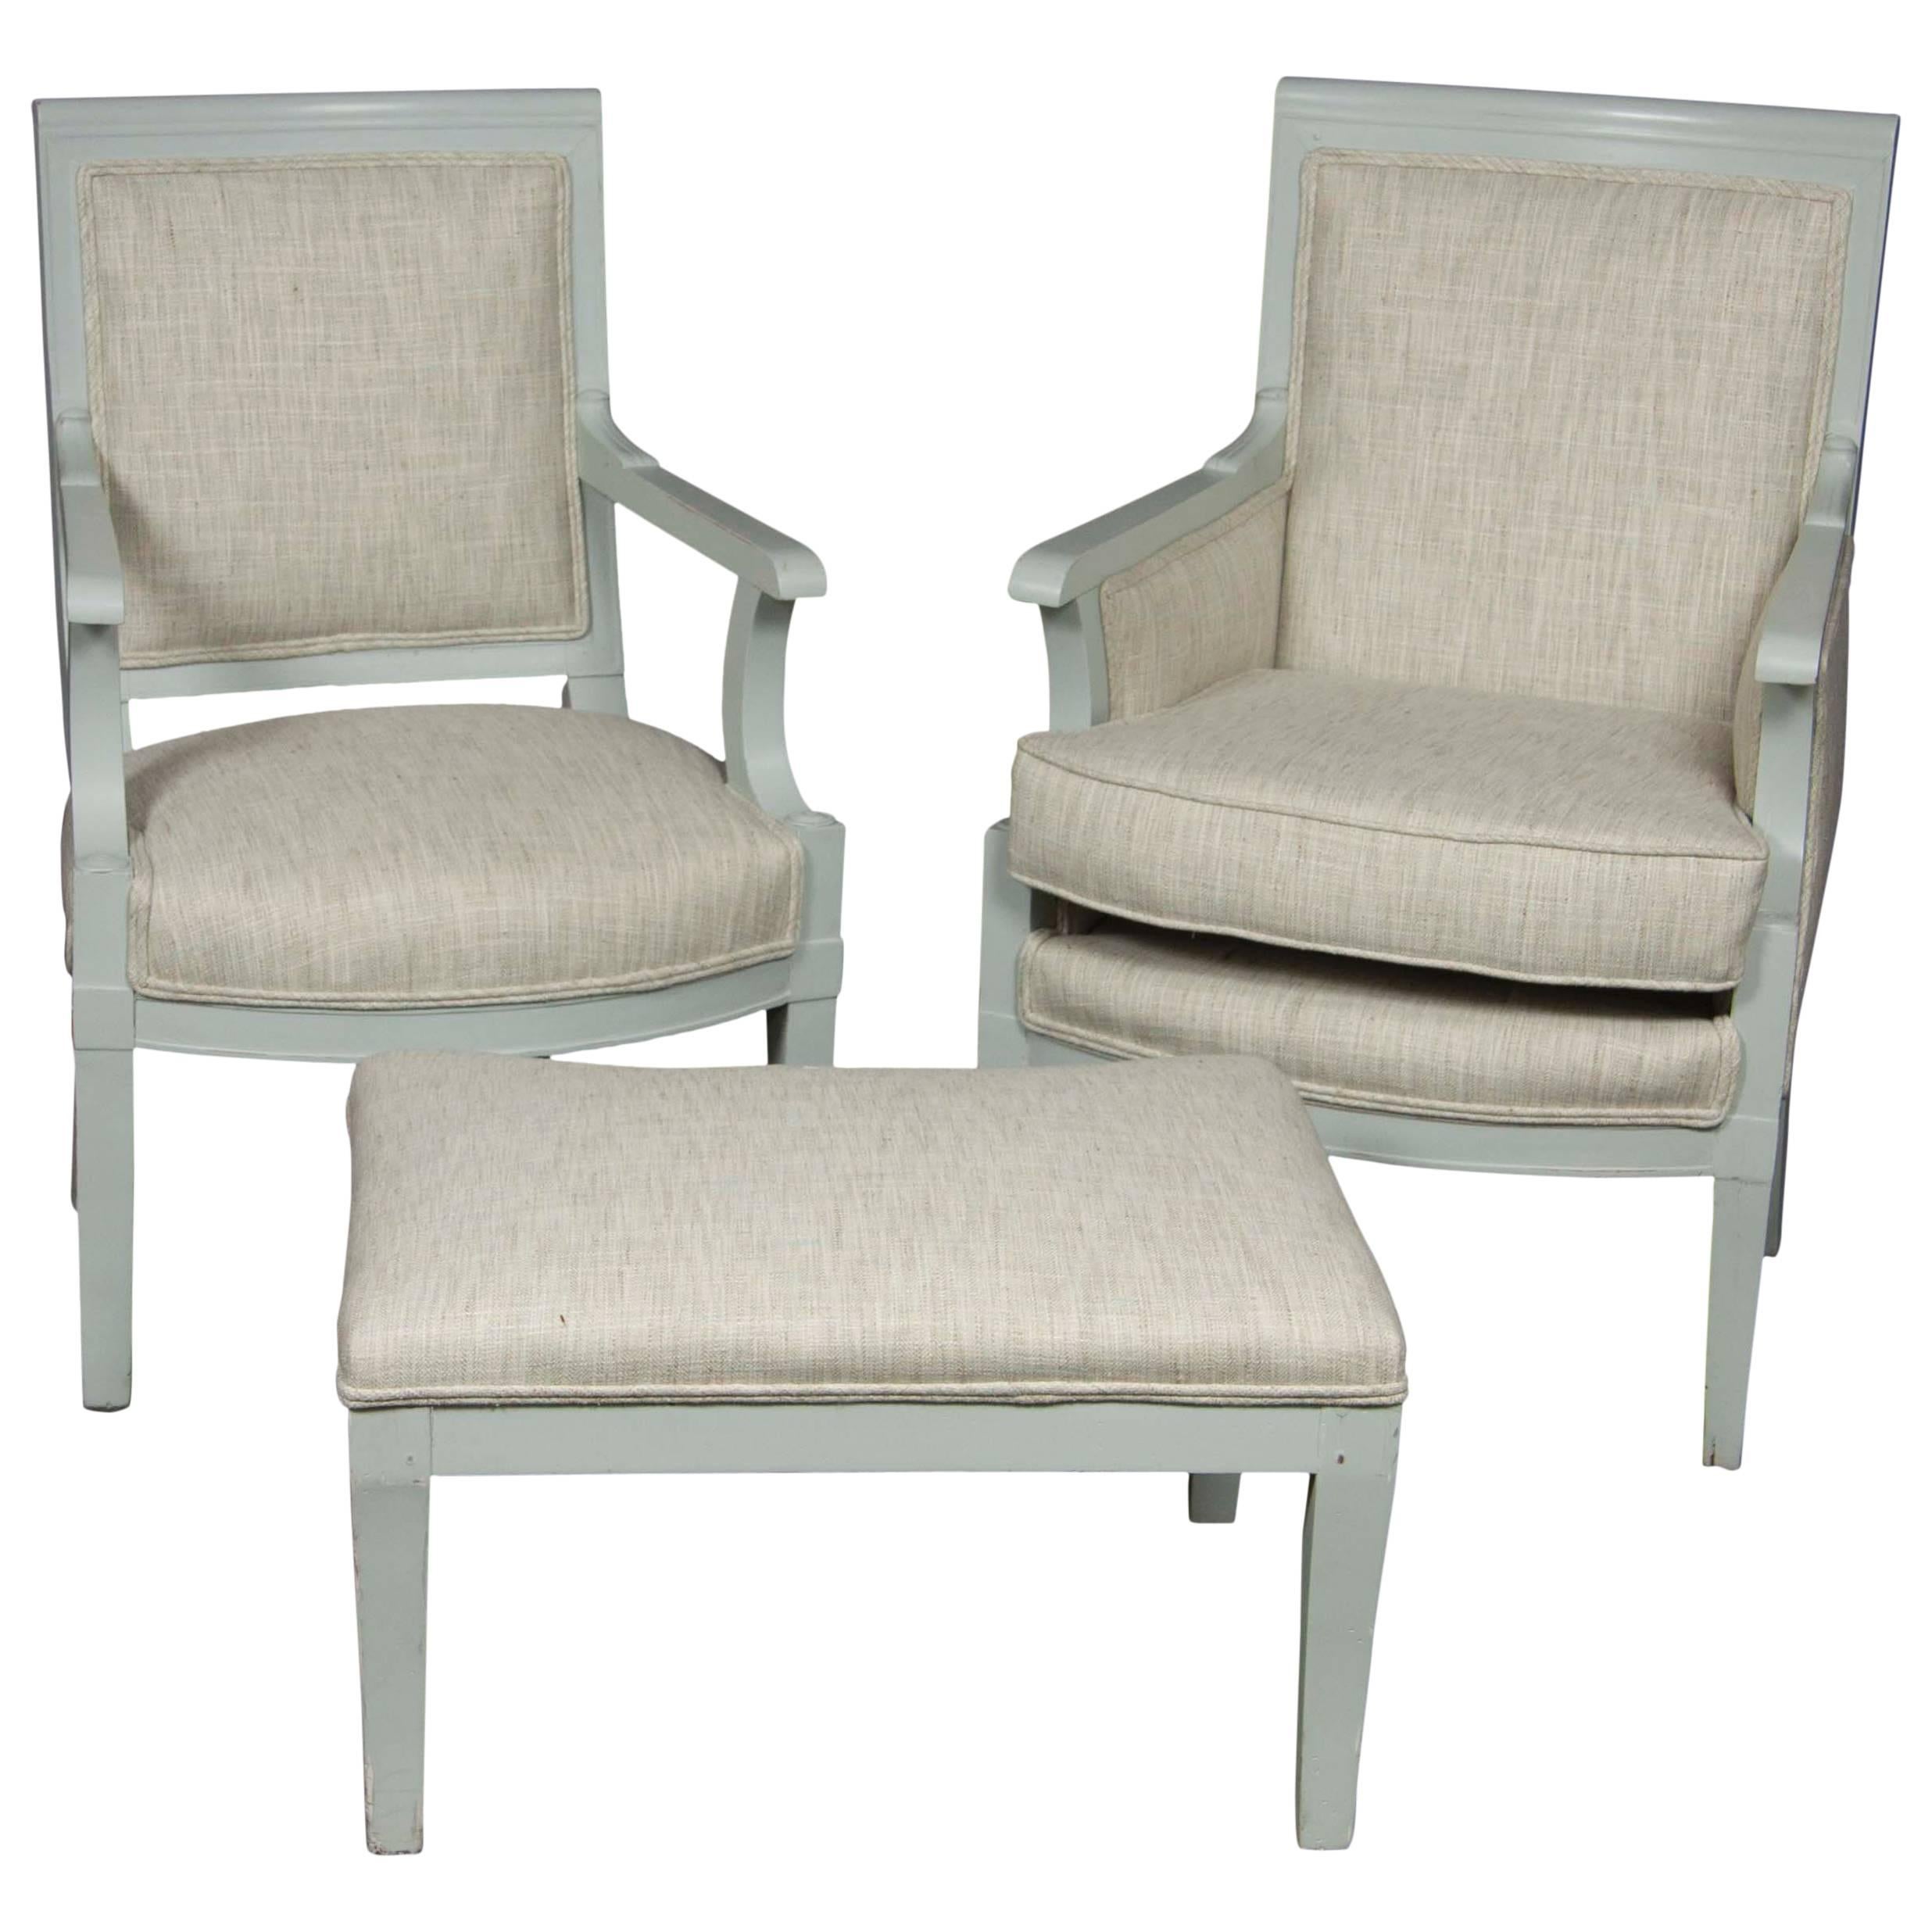 Suite of Painted Bergere, Fauteuil and Footstool